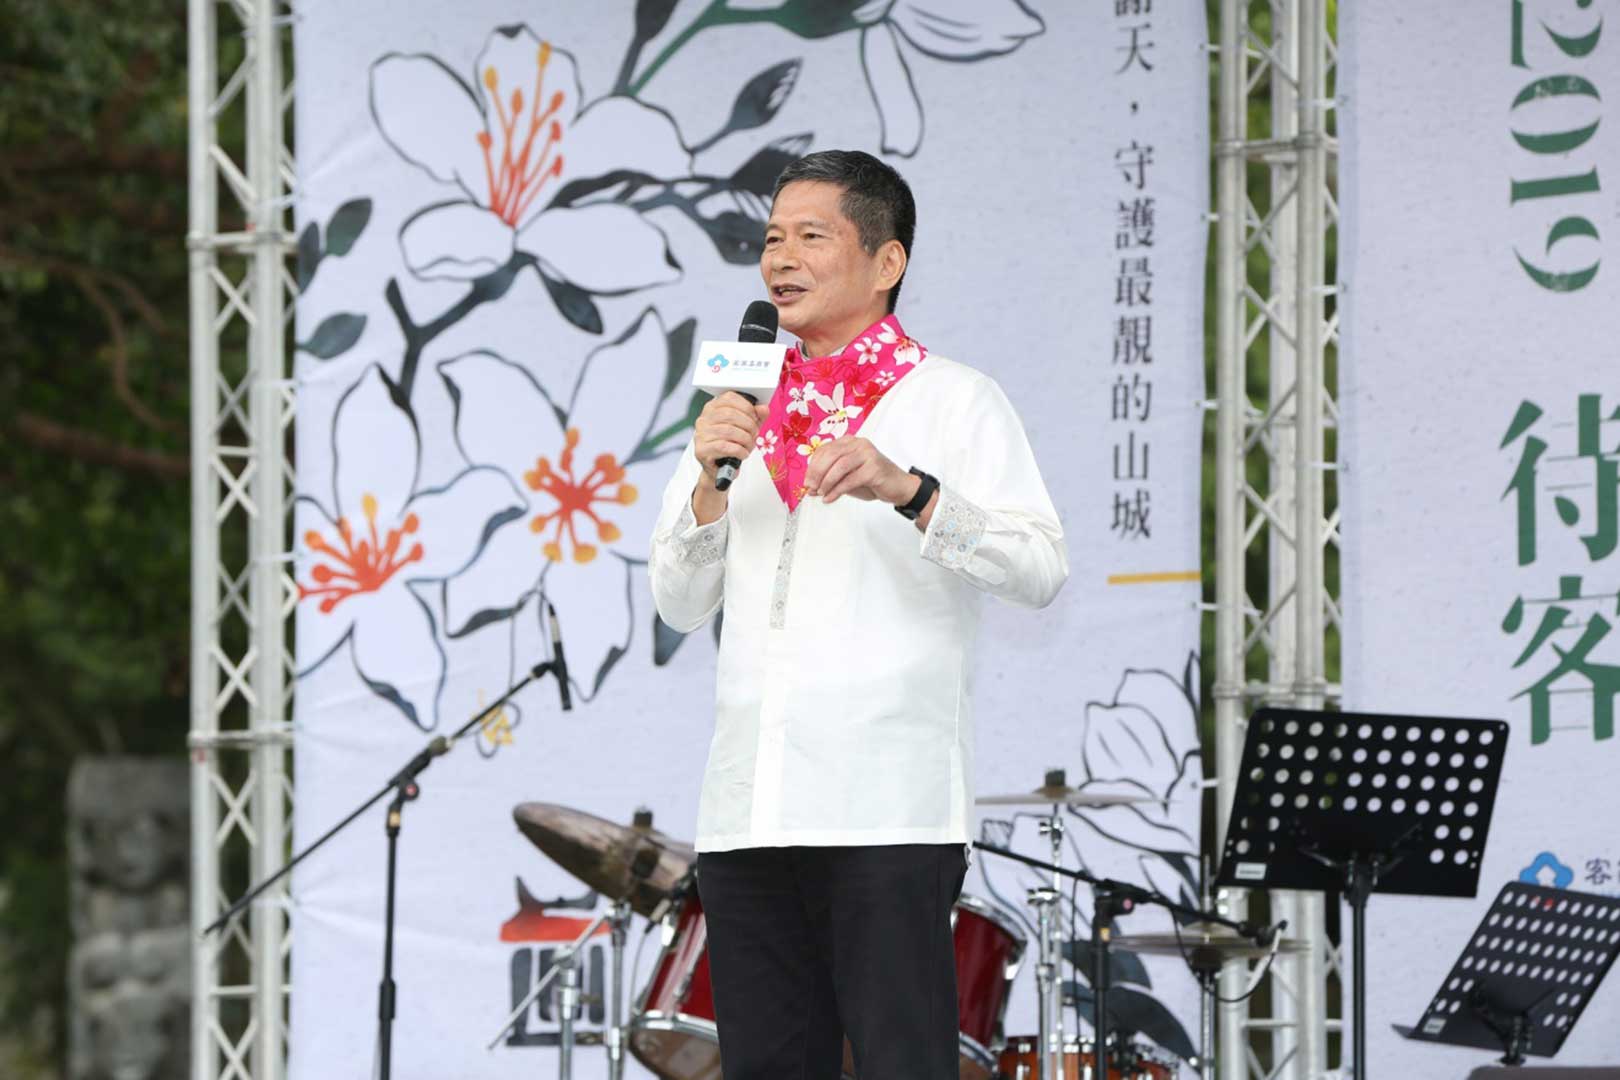 HAC Minister Lee pointed out in his speech that the festival, one of the biggest celebratory events to be held for 18 years straight in Taiwan, has been hosted by 14 different county and city governments. 